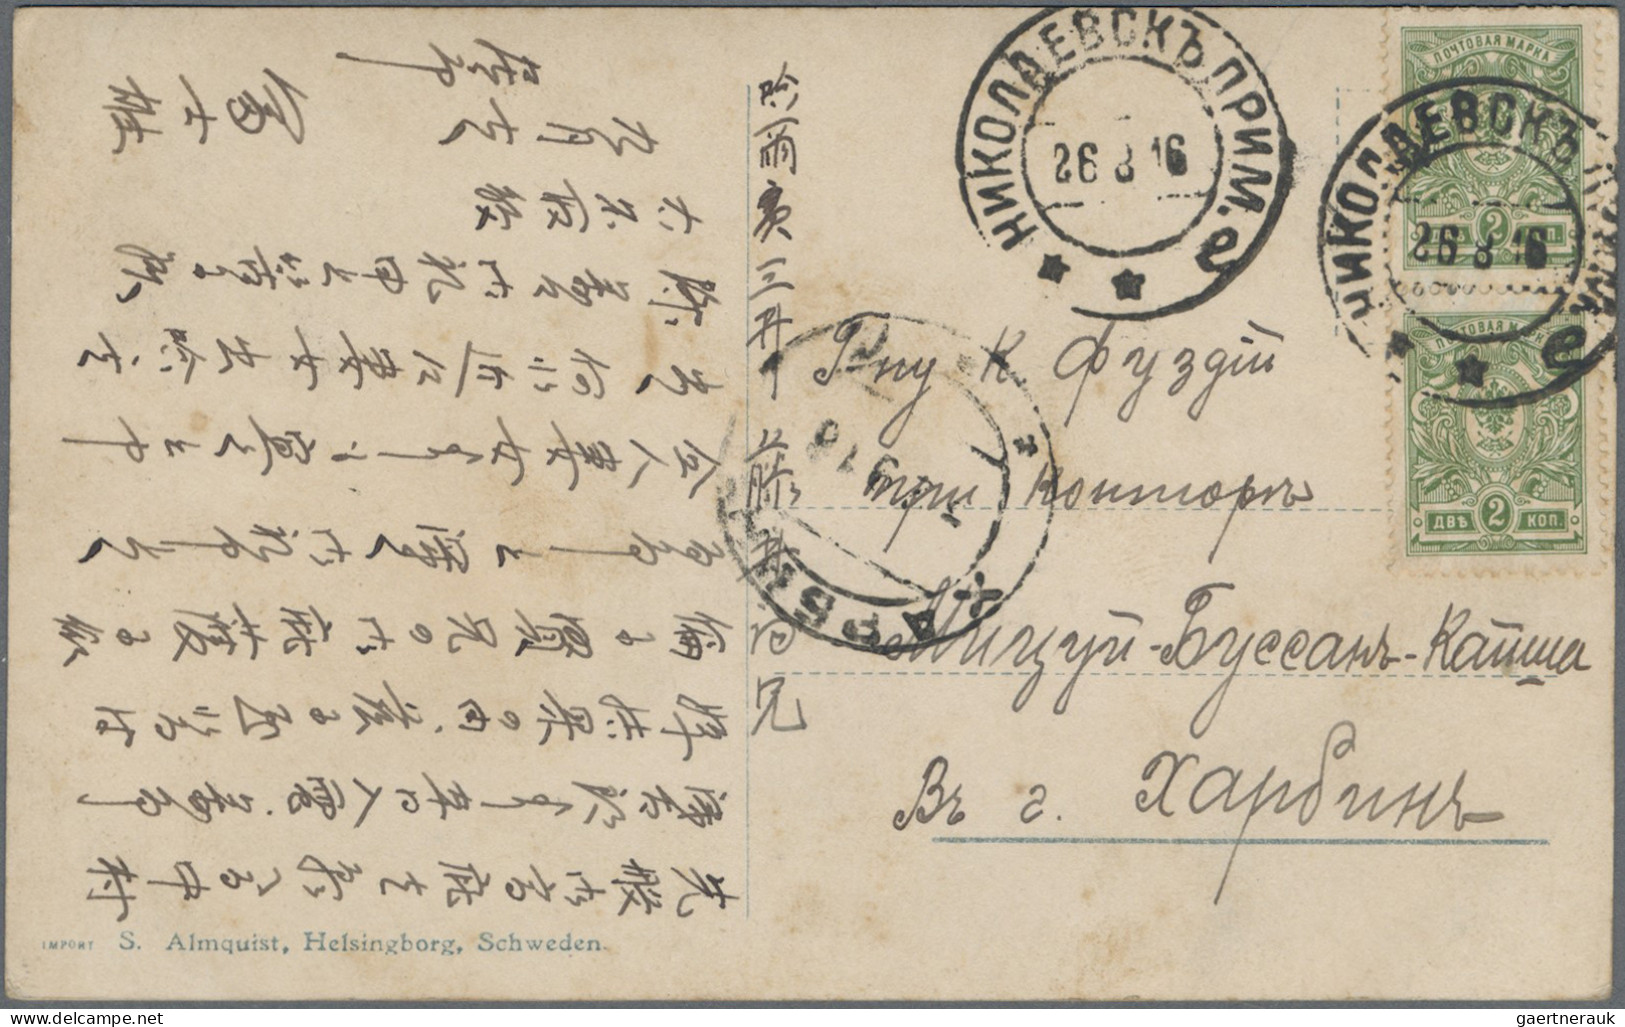 Russian Post in China: 1902/18, mainly used in Manchuria, mostly franked ppc. Ra